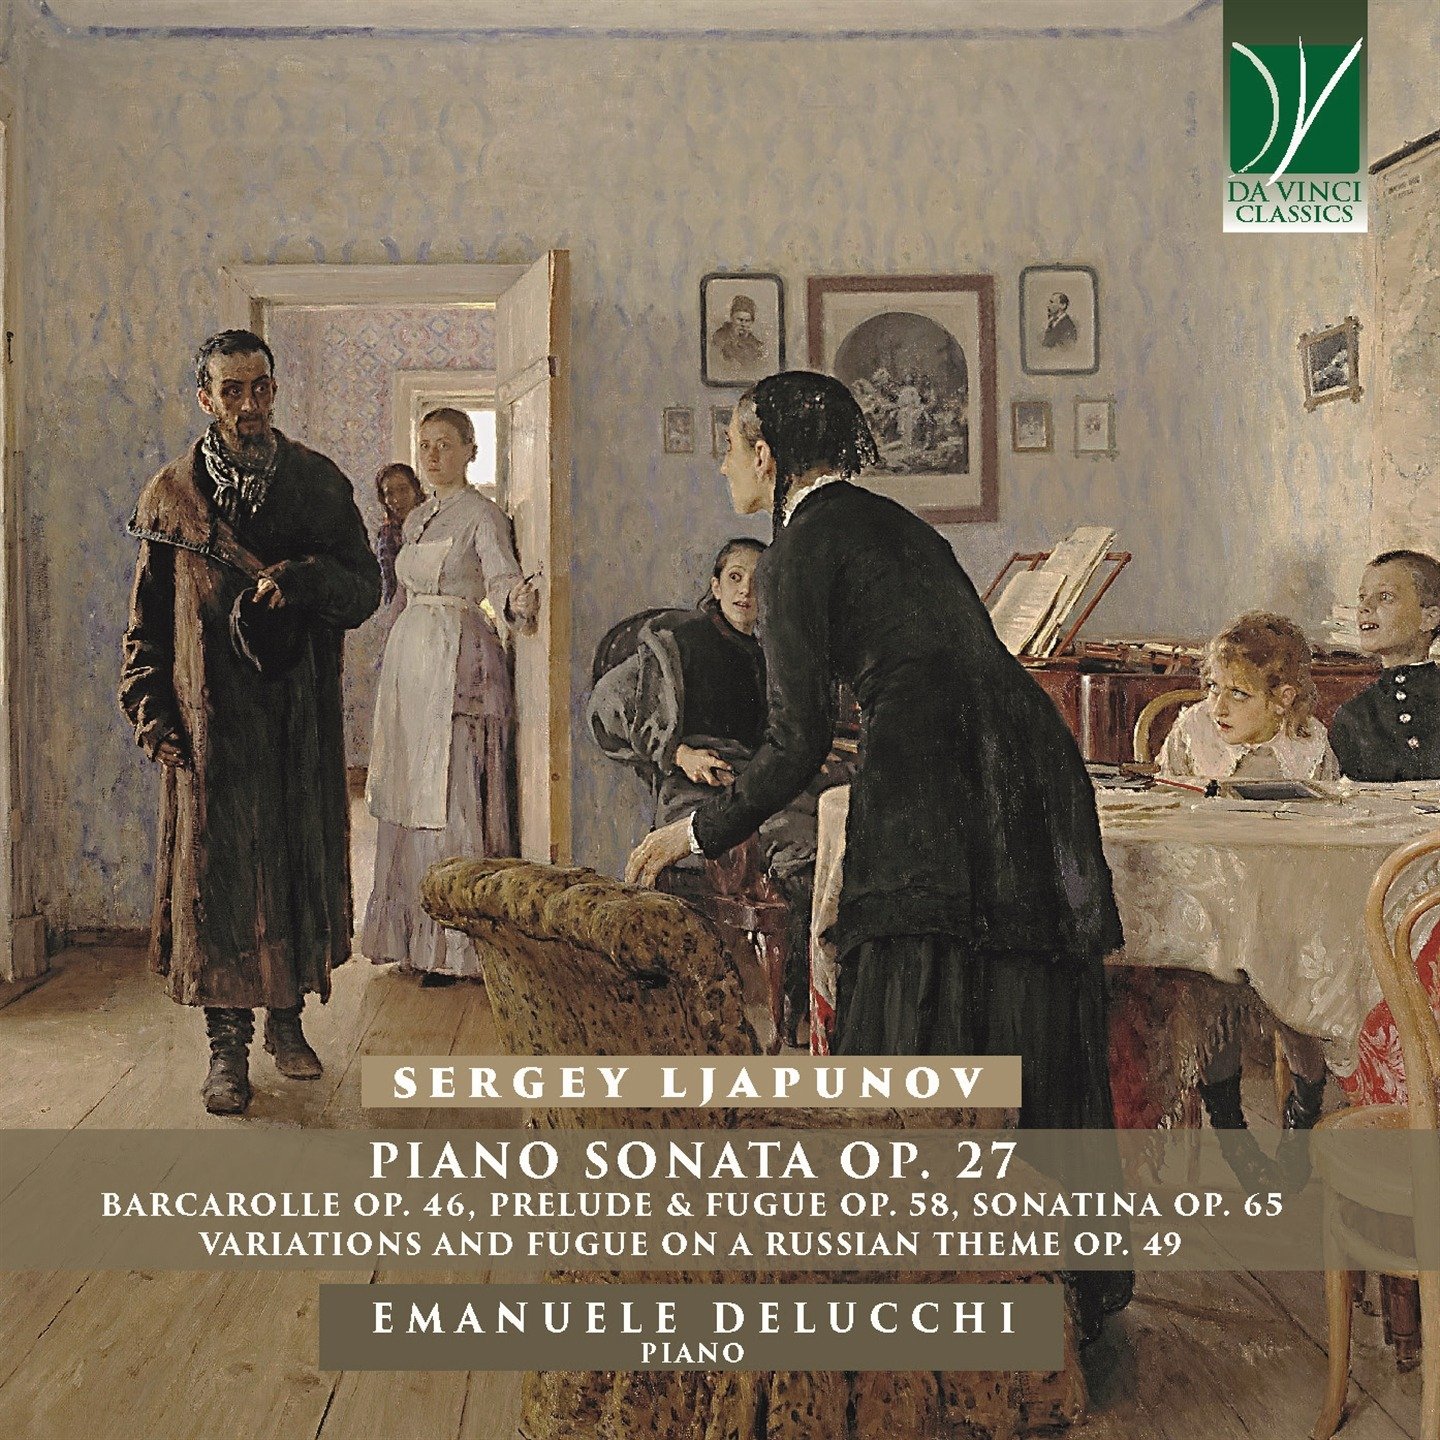 CD Shop - DELUCCHI, EMANUELE SERGEY LJAPUNOV: PIANO SONATA OP. 27 AND OTHER PIANO WORKS